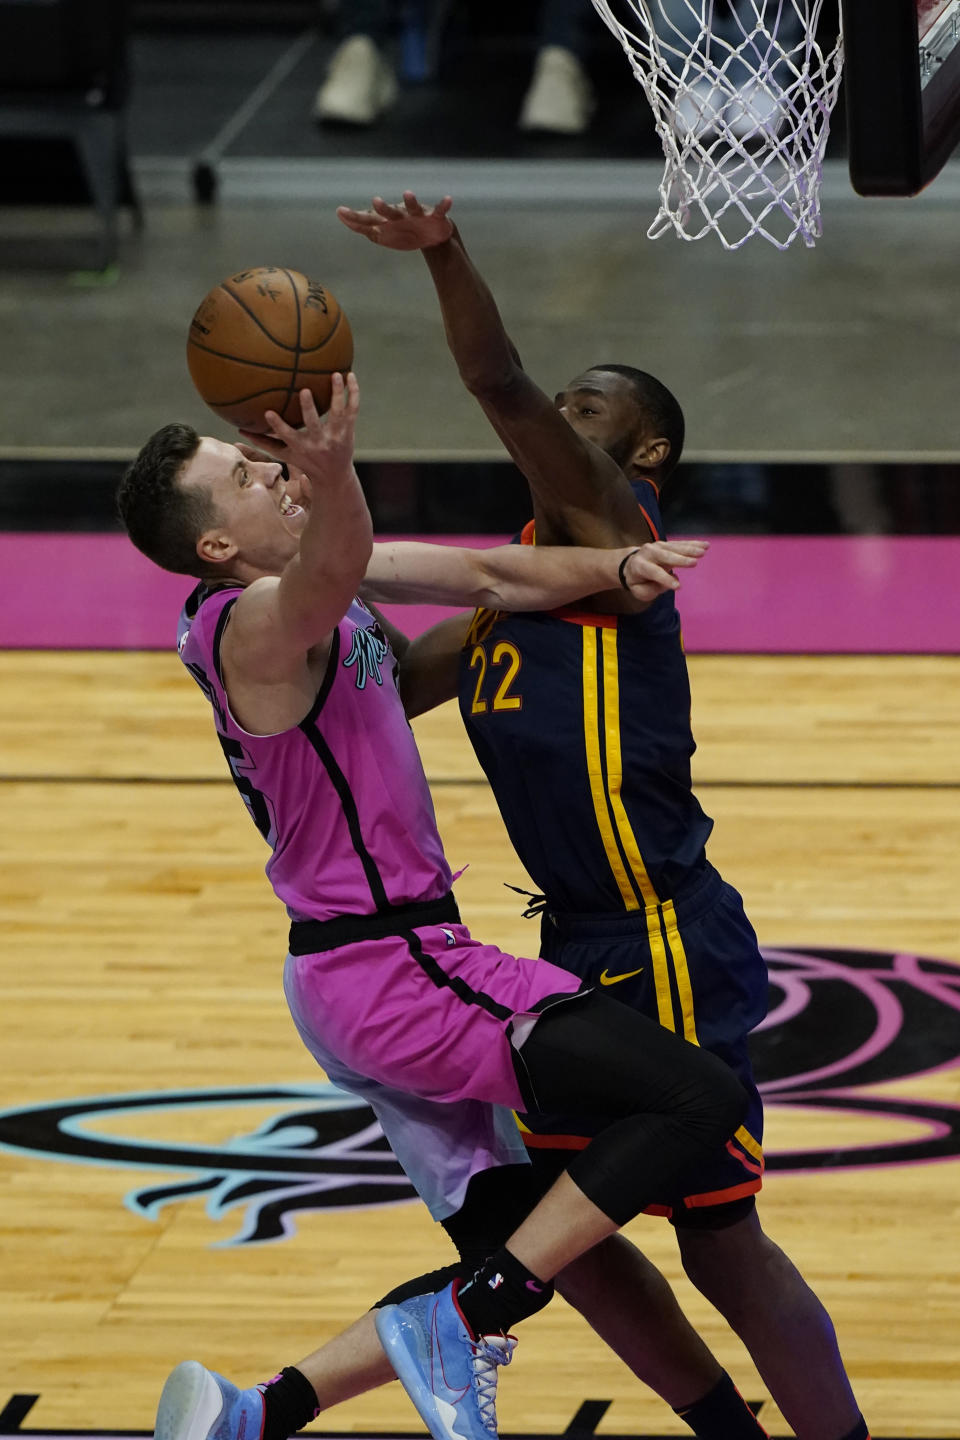 Miami Heat guard Duncan Robinson (55) drives to the basket as Golden State Warriors forward Andrew Wiggins (22) defends during the second half of an NBA basketball game, Thursday, April 1, 2021, in Miami. (AP Photo/Marta Lavandier)